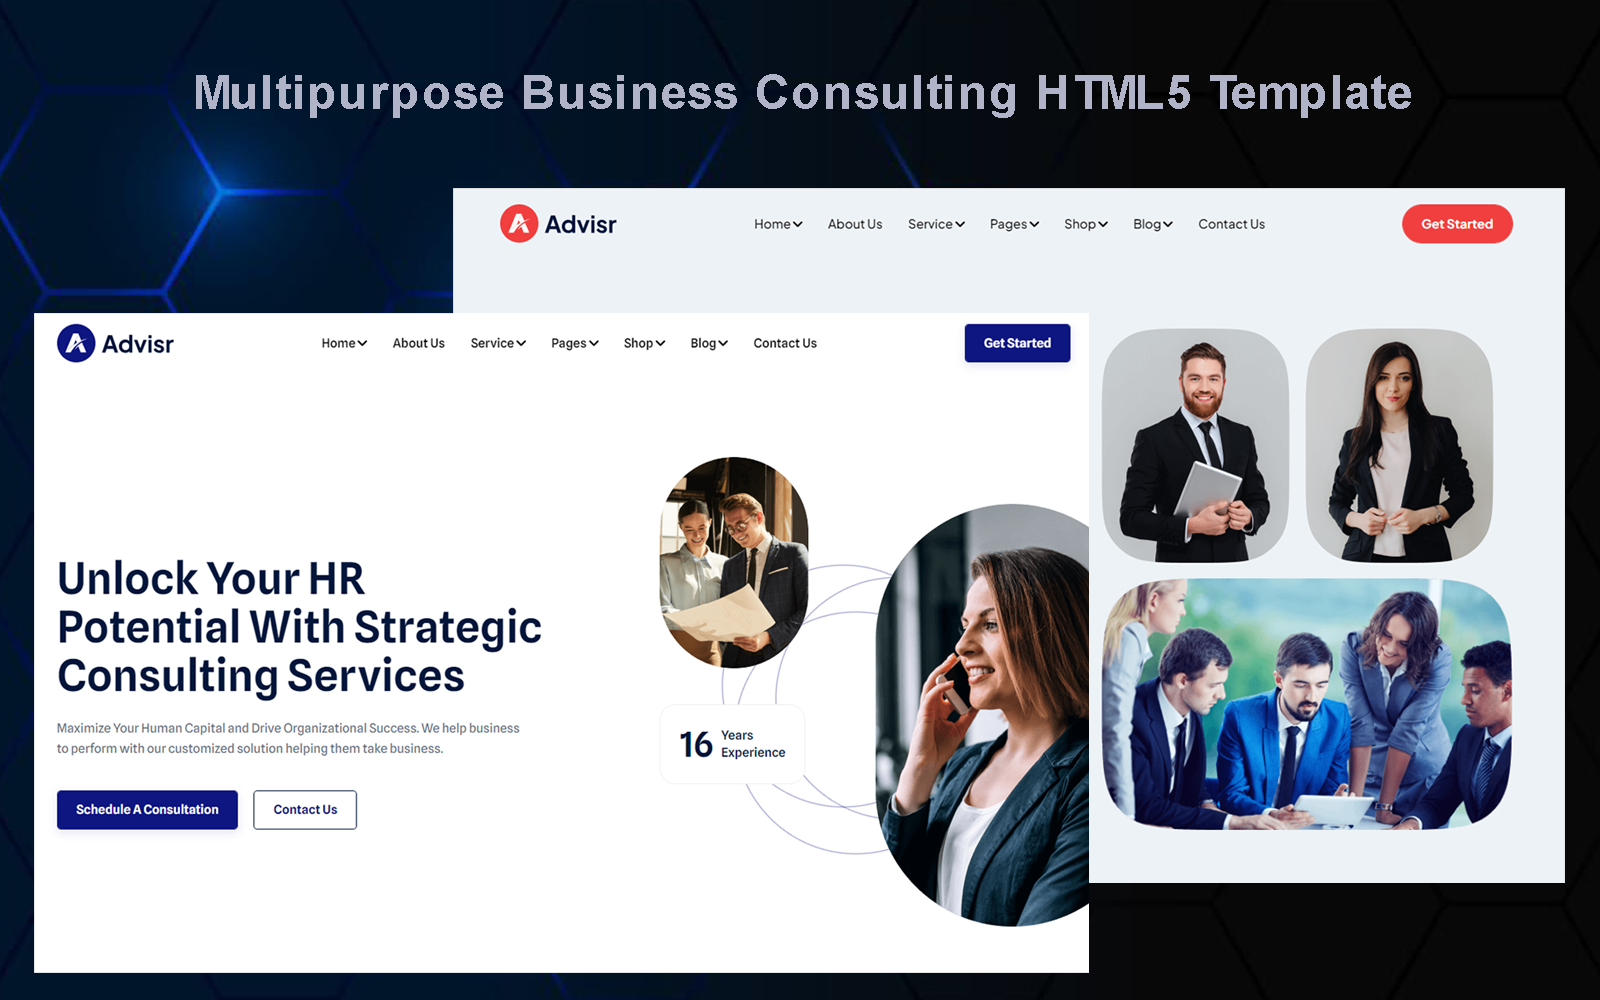 Multipurpose Business Consulting HTML5 Template